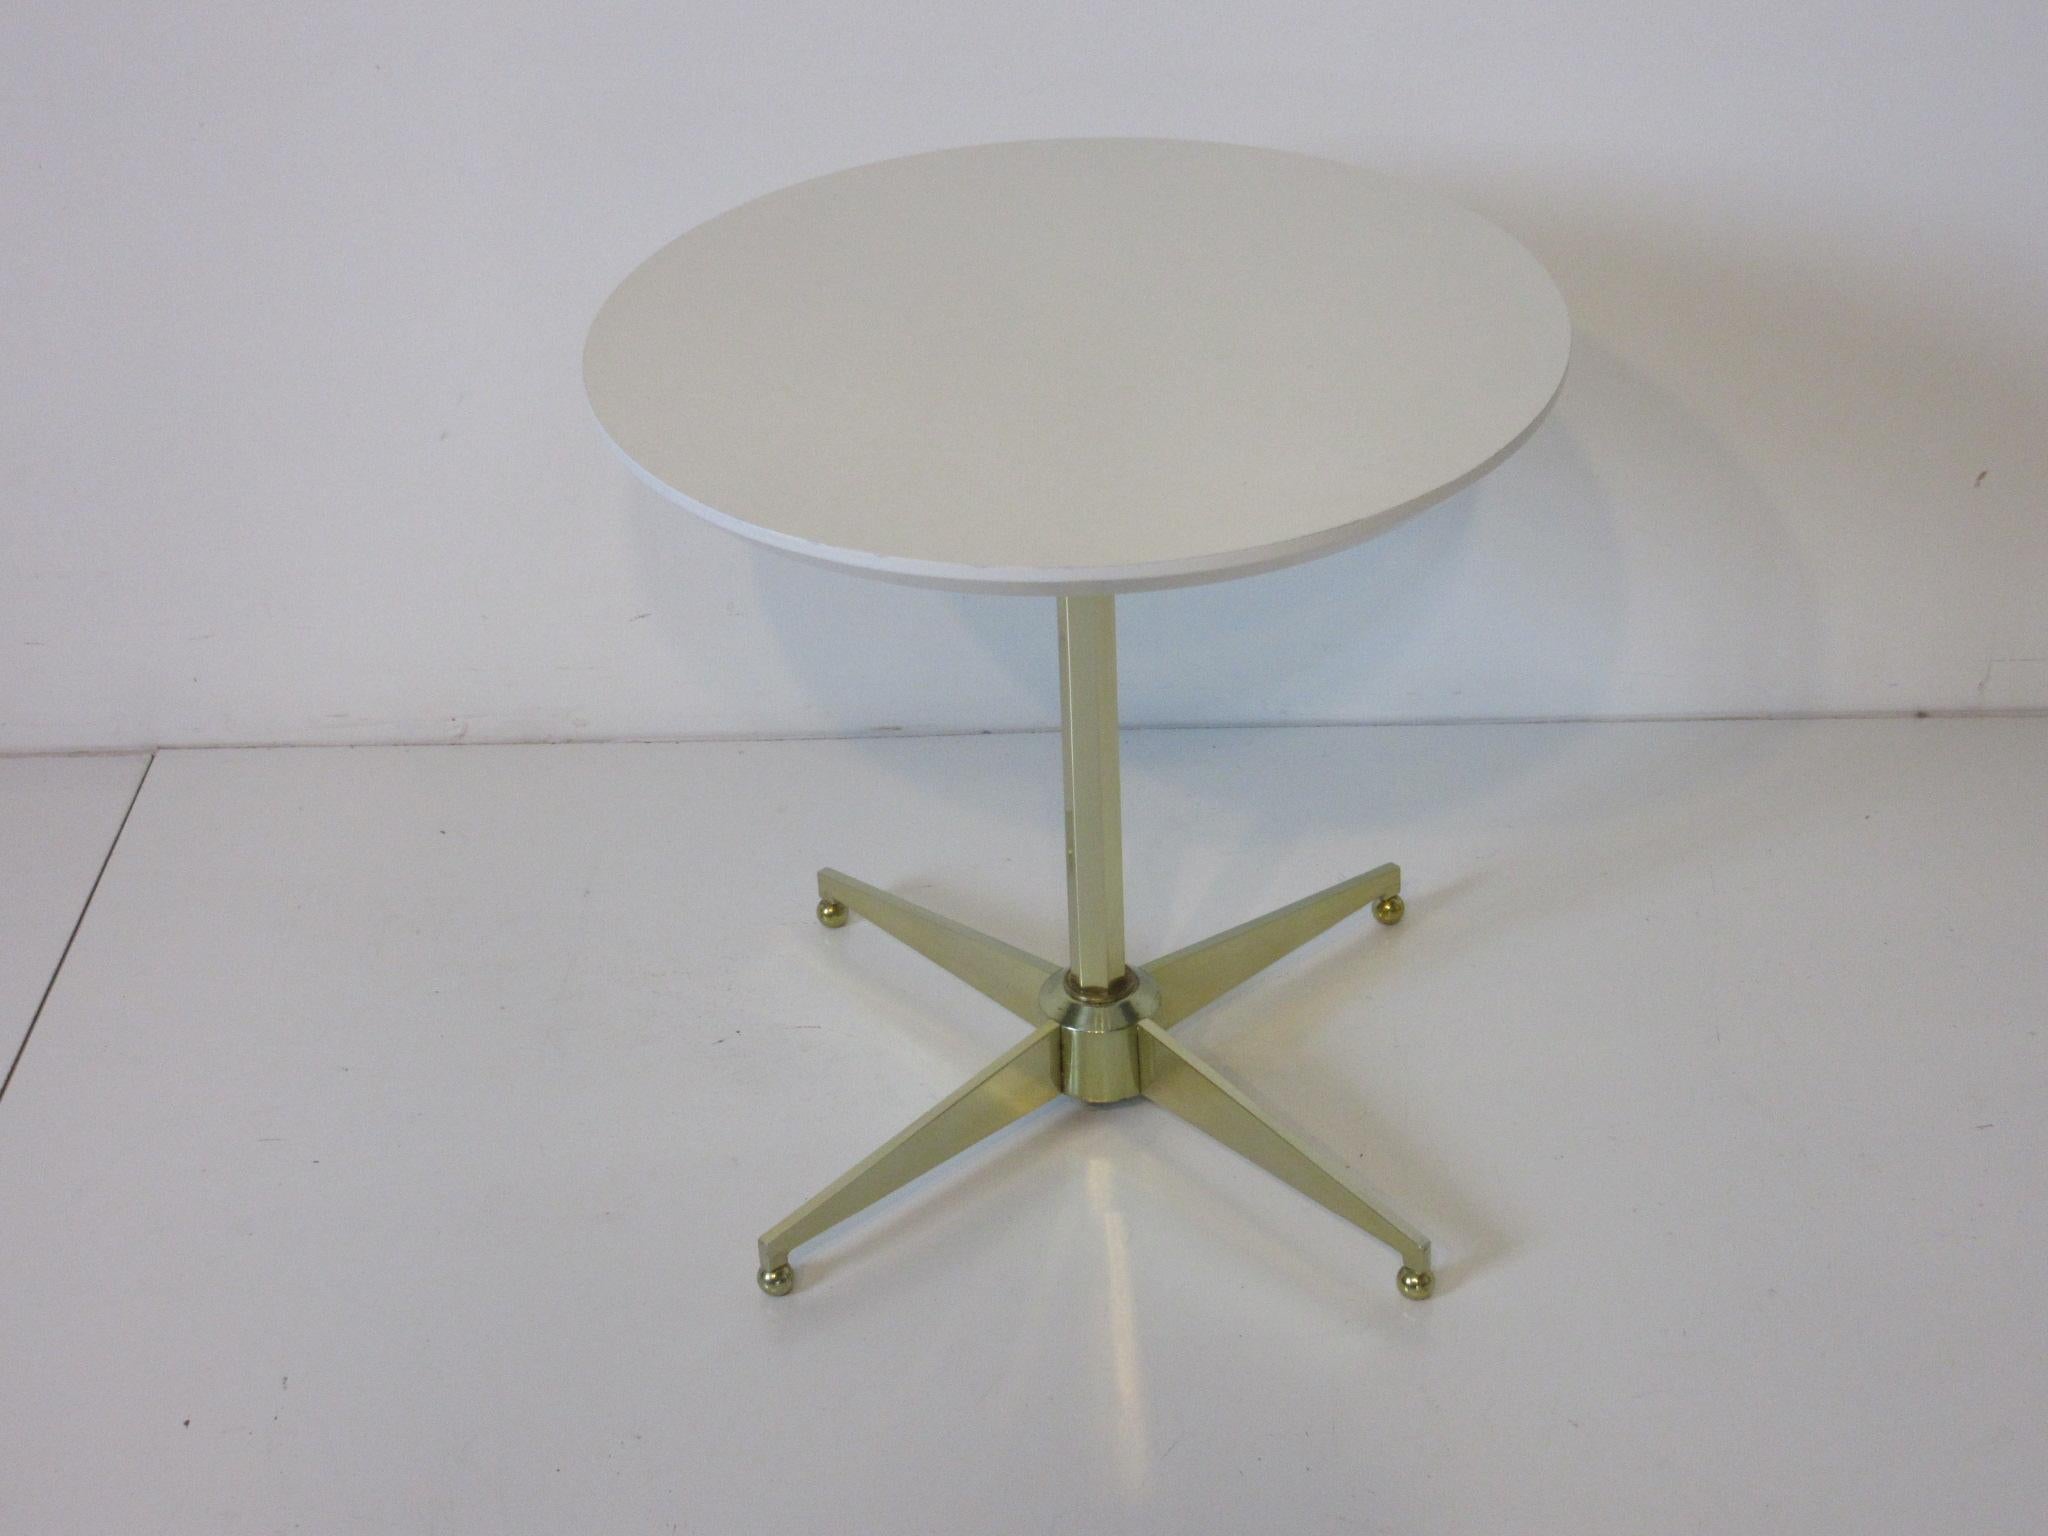 A polished brass star and octagon shaft based side or end table with a round white laminate top and small brass balls as feet, manufactured by the Plametron Company, Miami, Fla. A very simple but elegant design from the period.